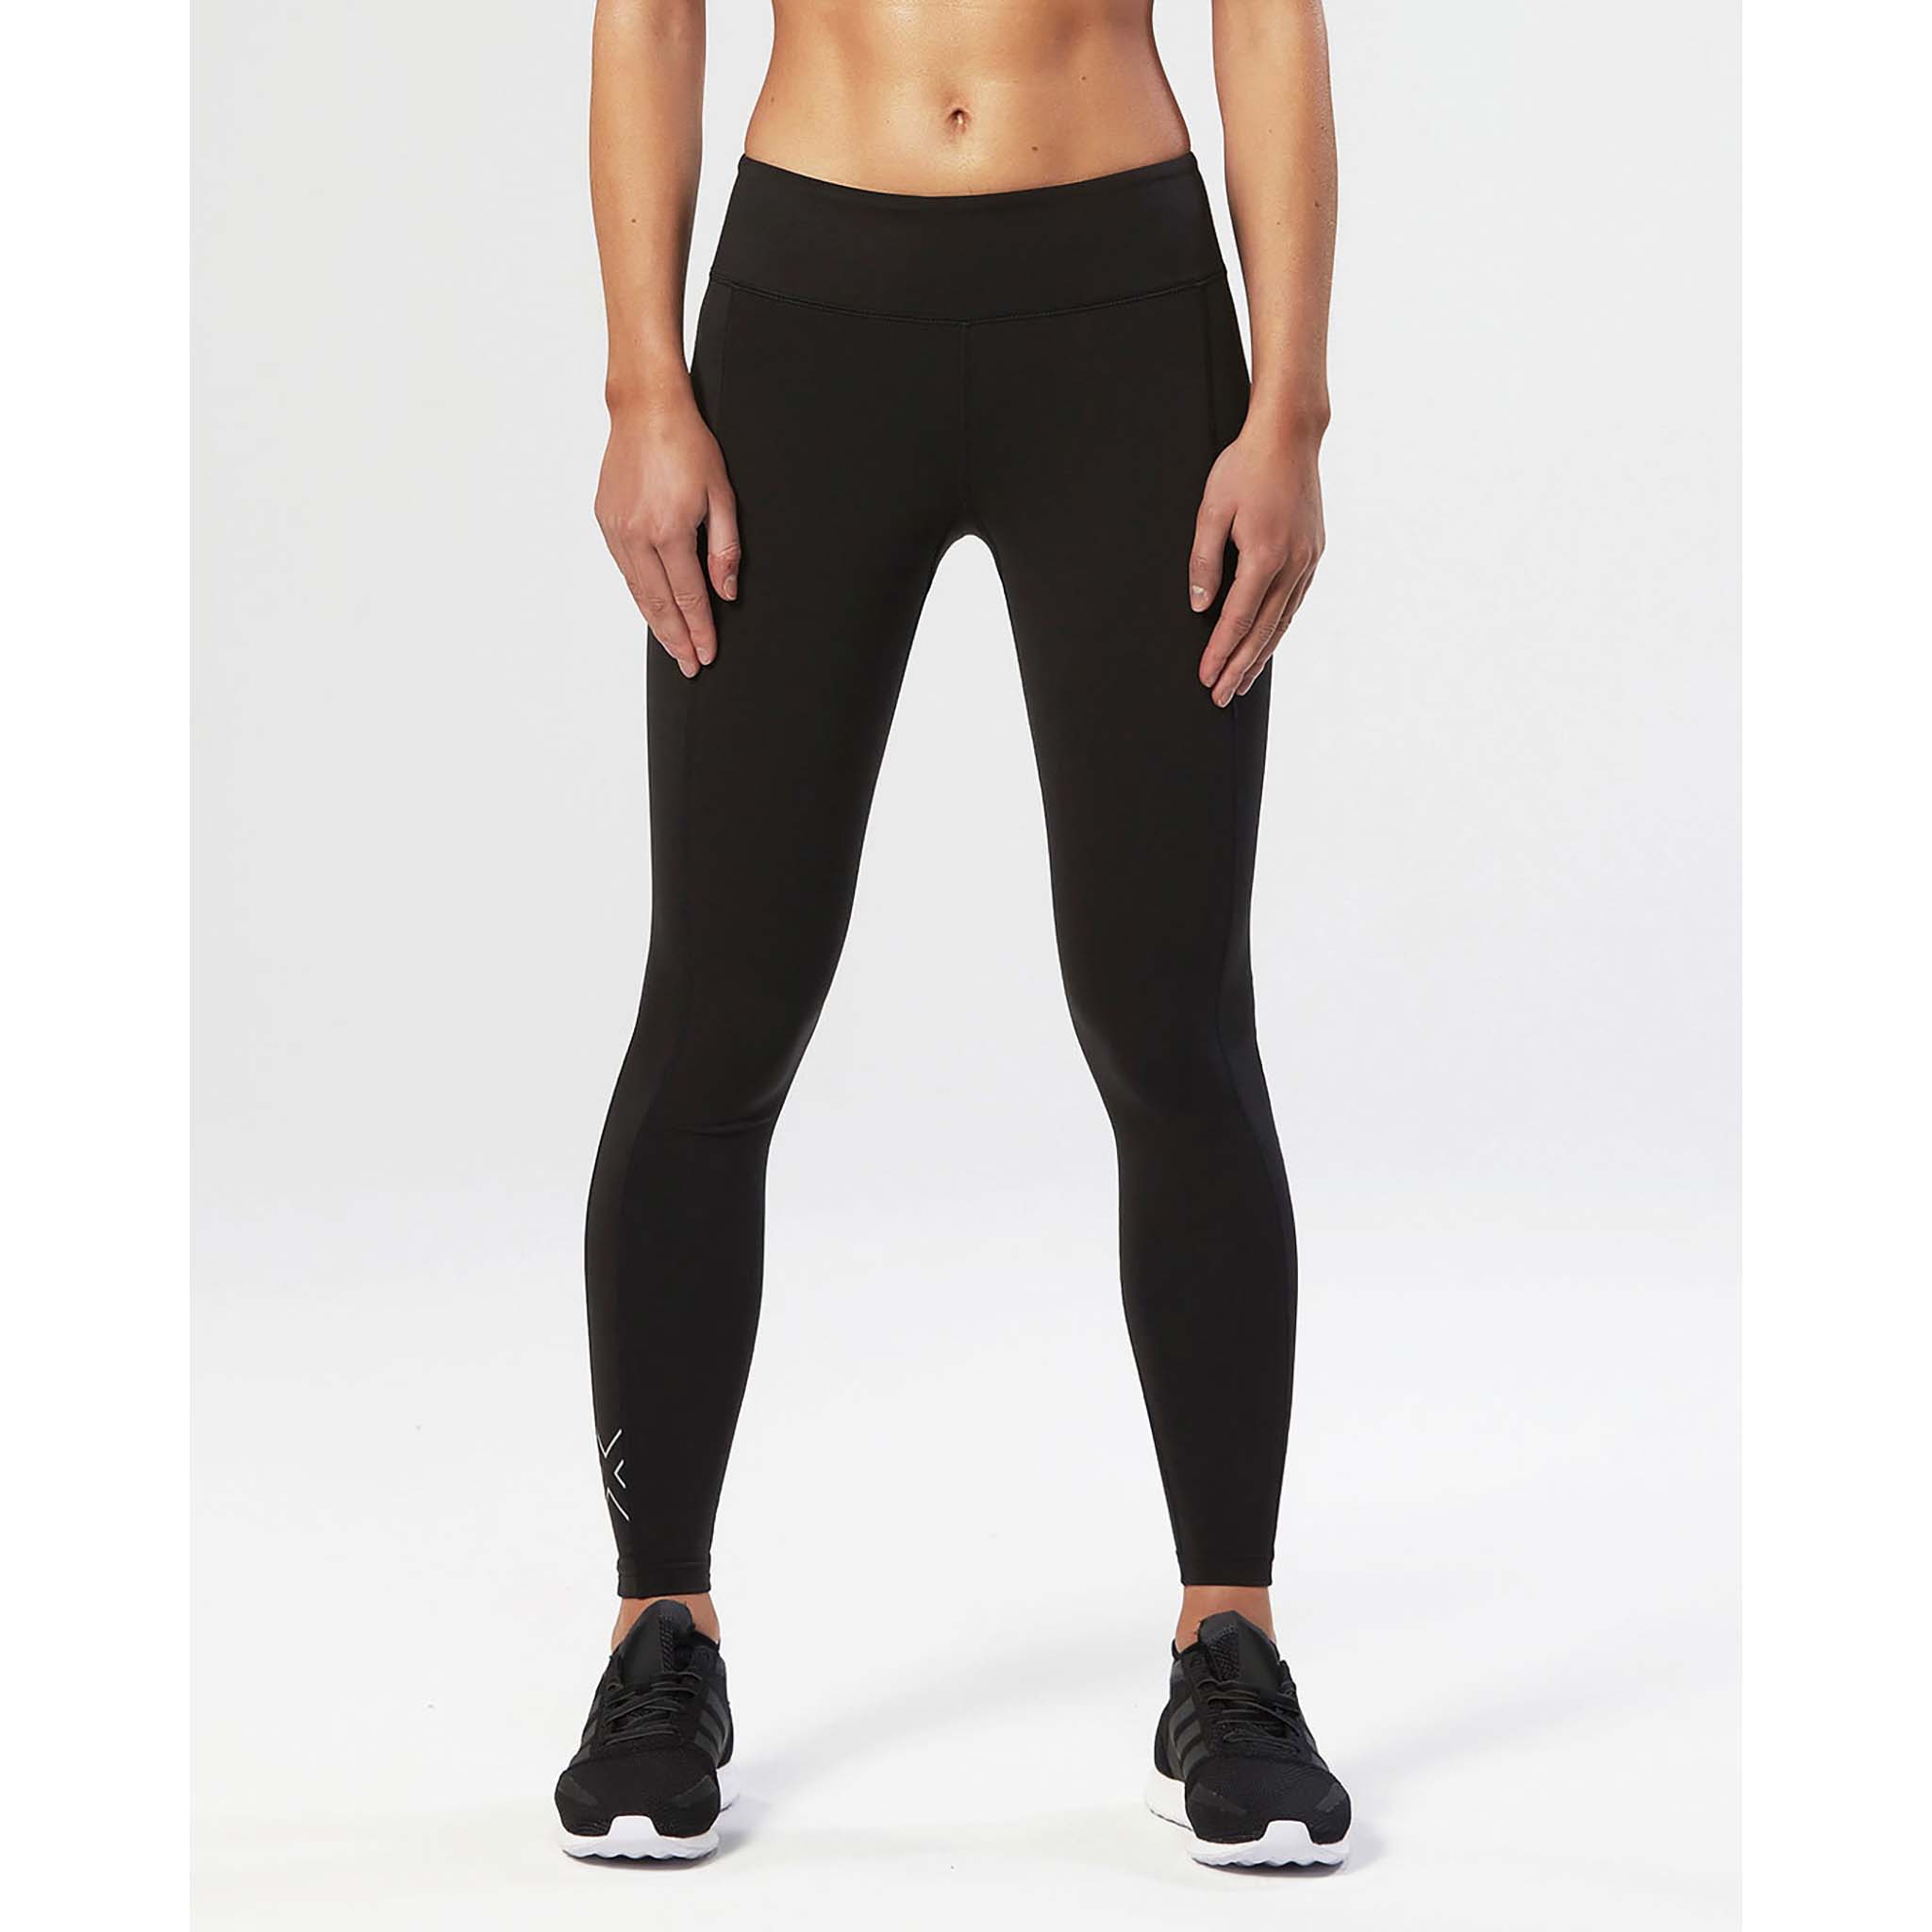 2XU mid-rise compression tights for women Black / XS